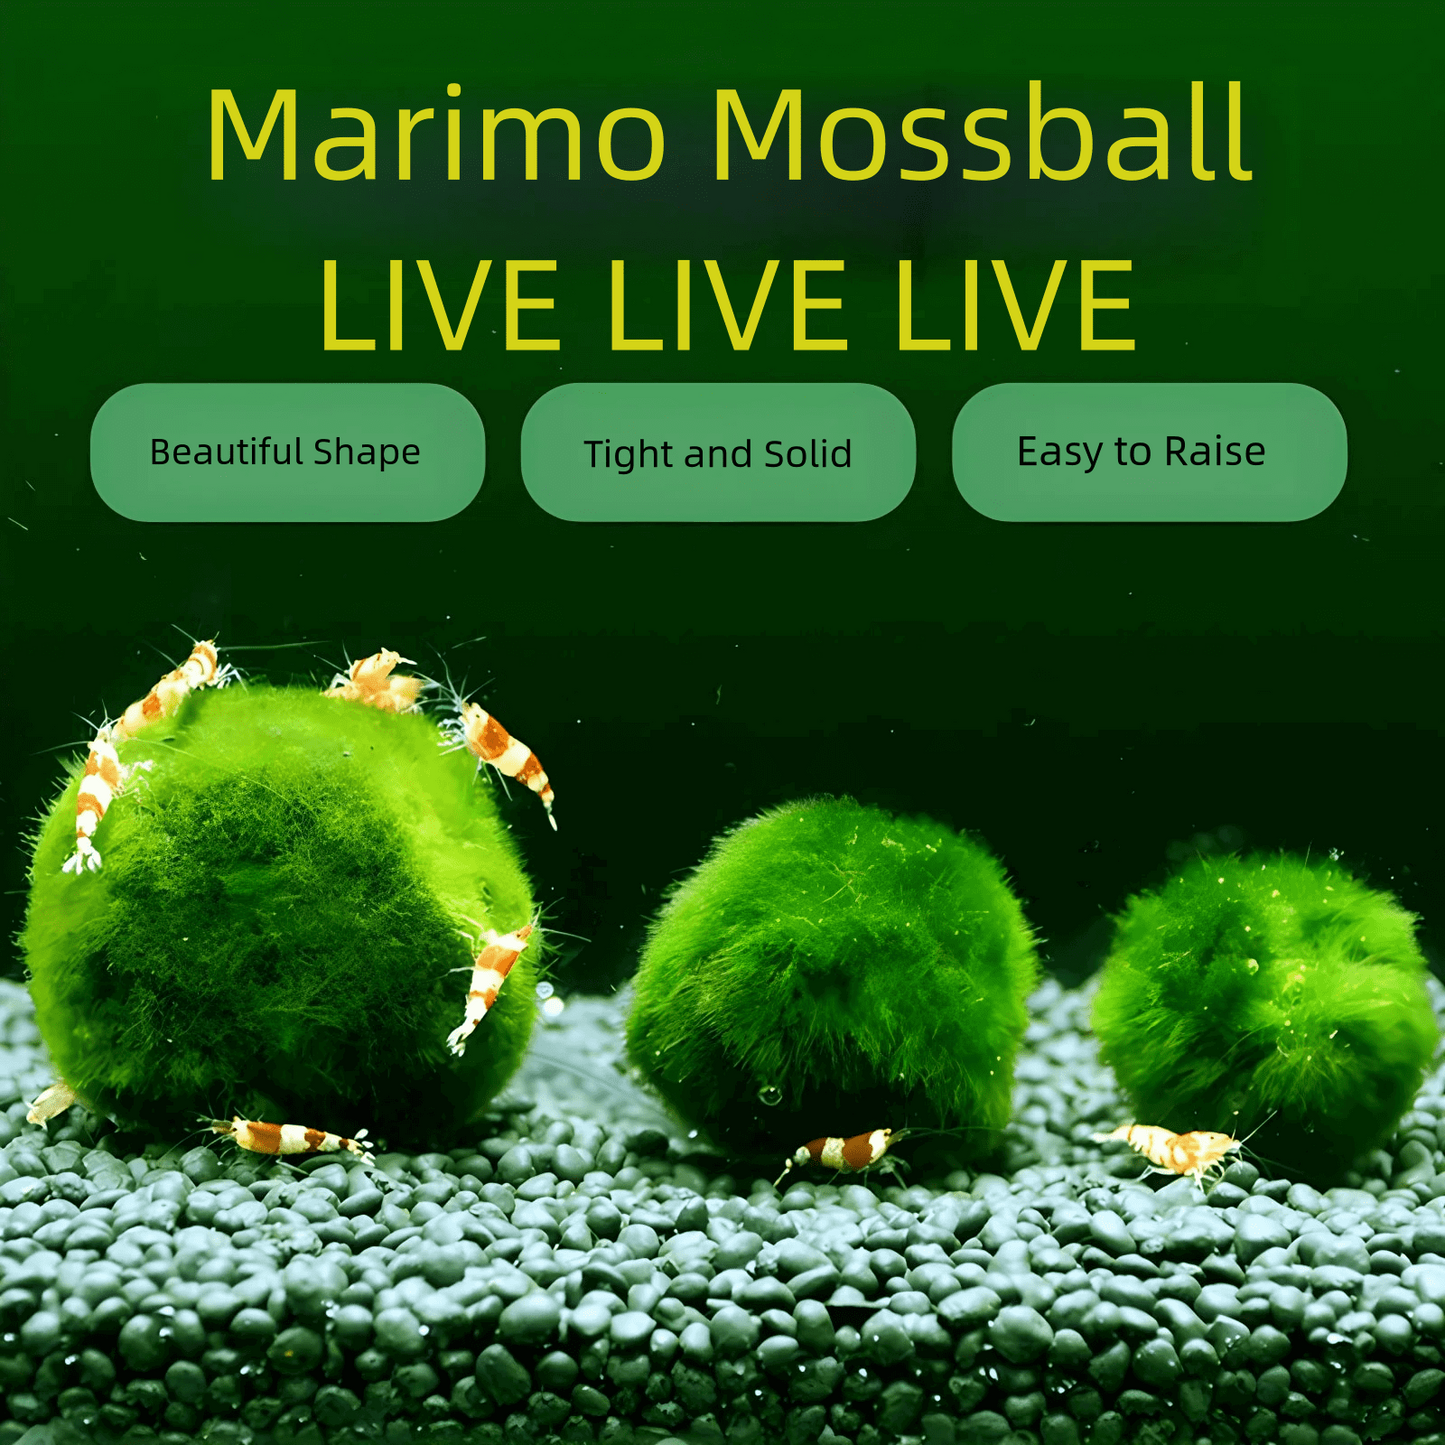 Large Marimo Moss Ball 1 pc 4-5cm LIVE Marimo Moss Ball Pet - JapaneseLive not Plastic
4-5 yrs 4-5cm LIVE Marimo Moss Ball Pet
~ 5cm
100% Real and Live Guaranteed - Moss Artistry
Moss Ball can survive in shadows, however, some sunshine